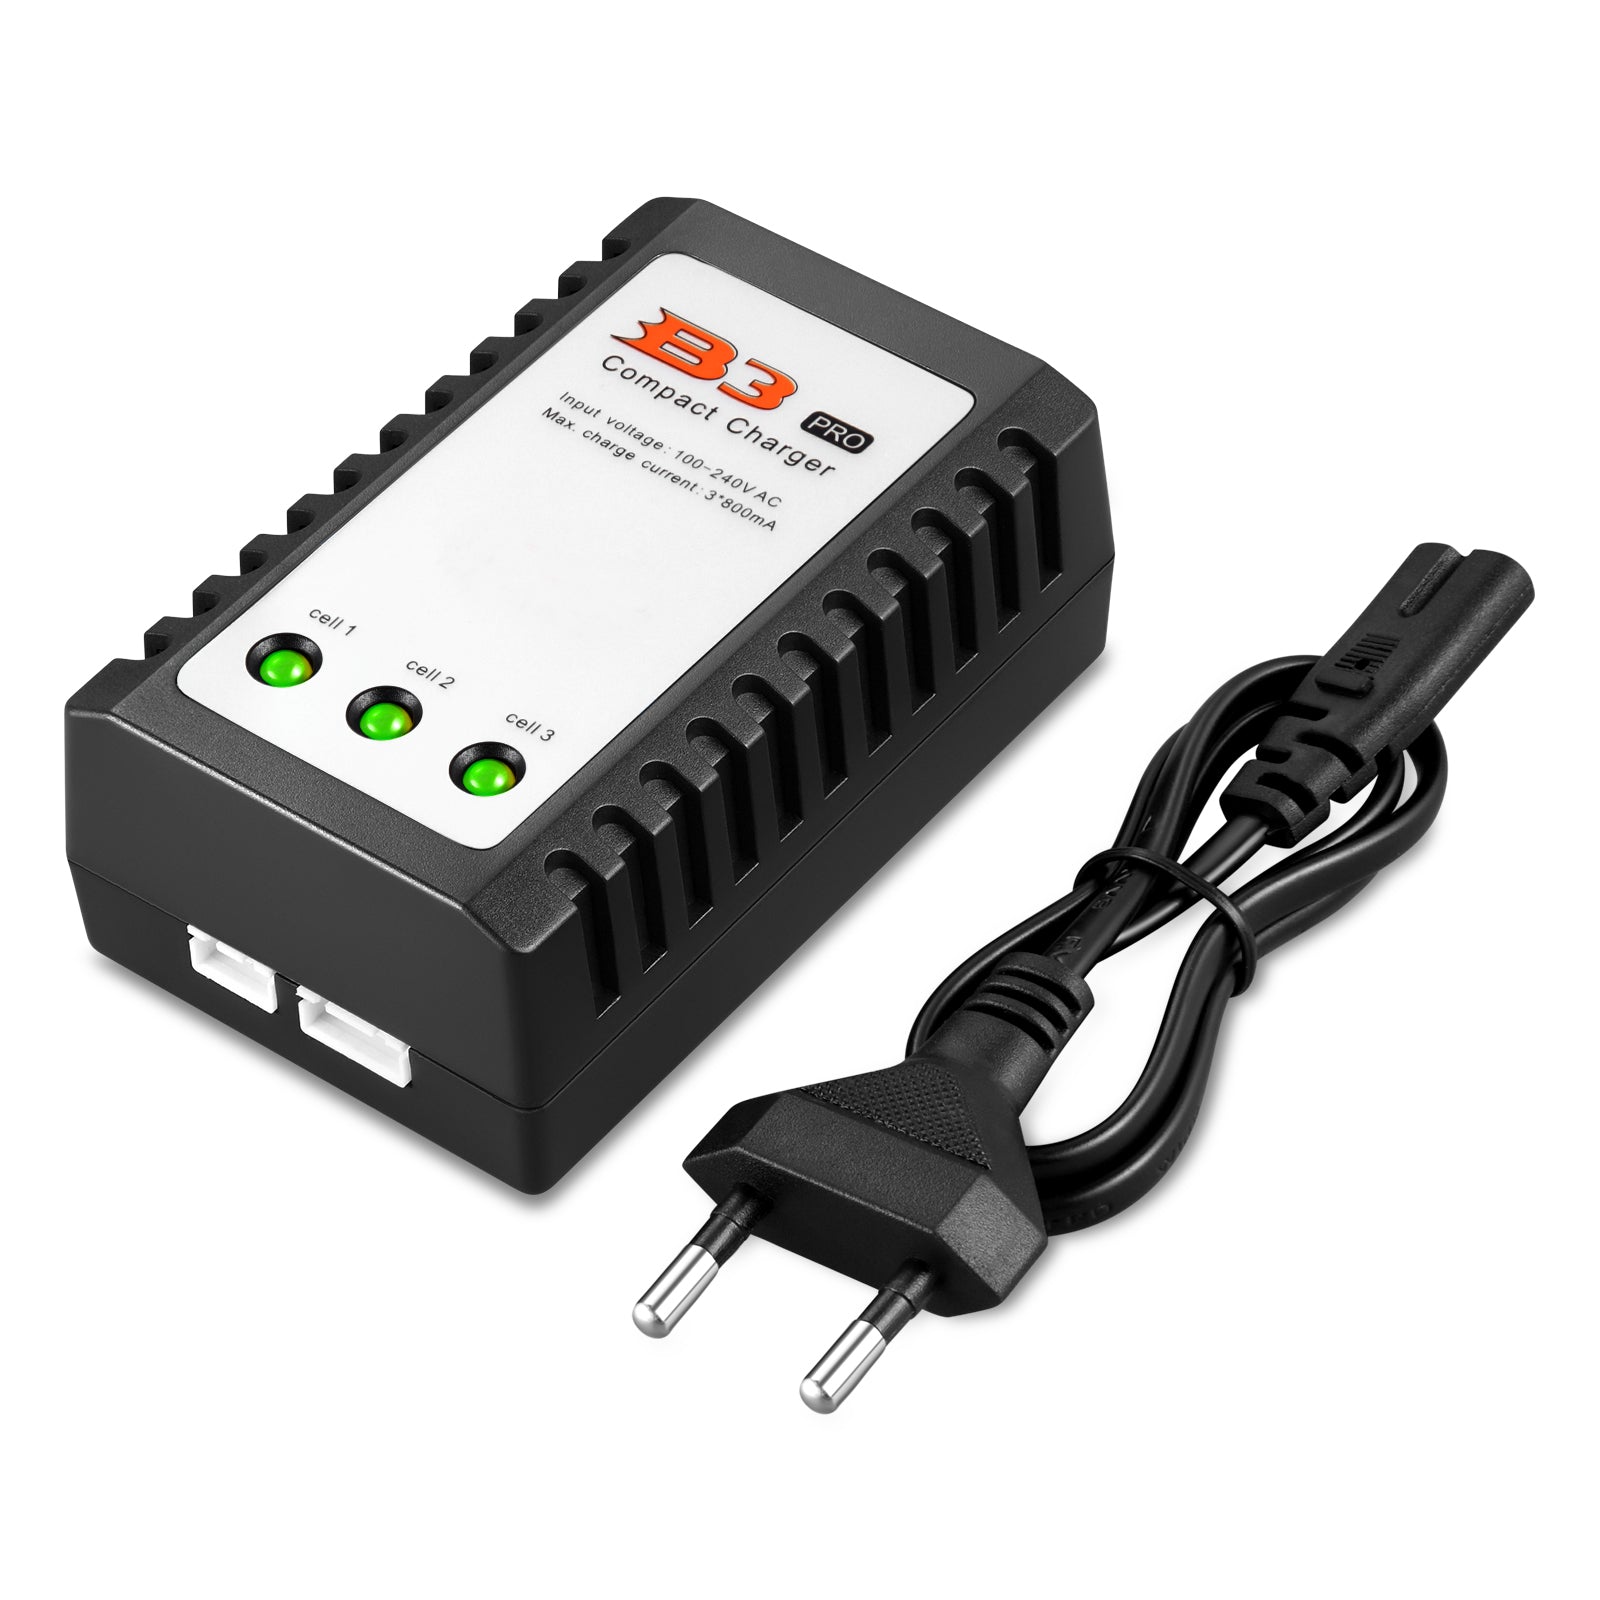 B3 Lipo Charger 10W 800mAh Balance Charger for 2S-3S Lithium